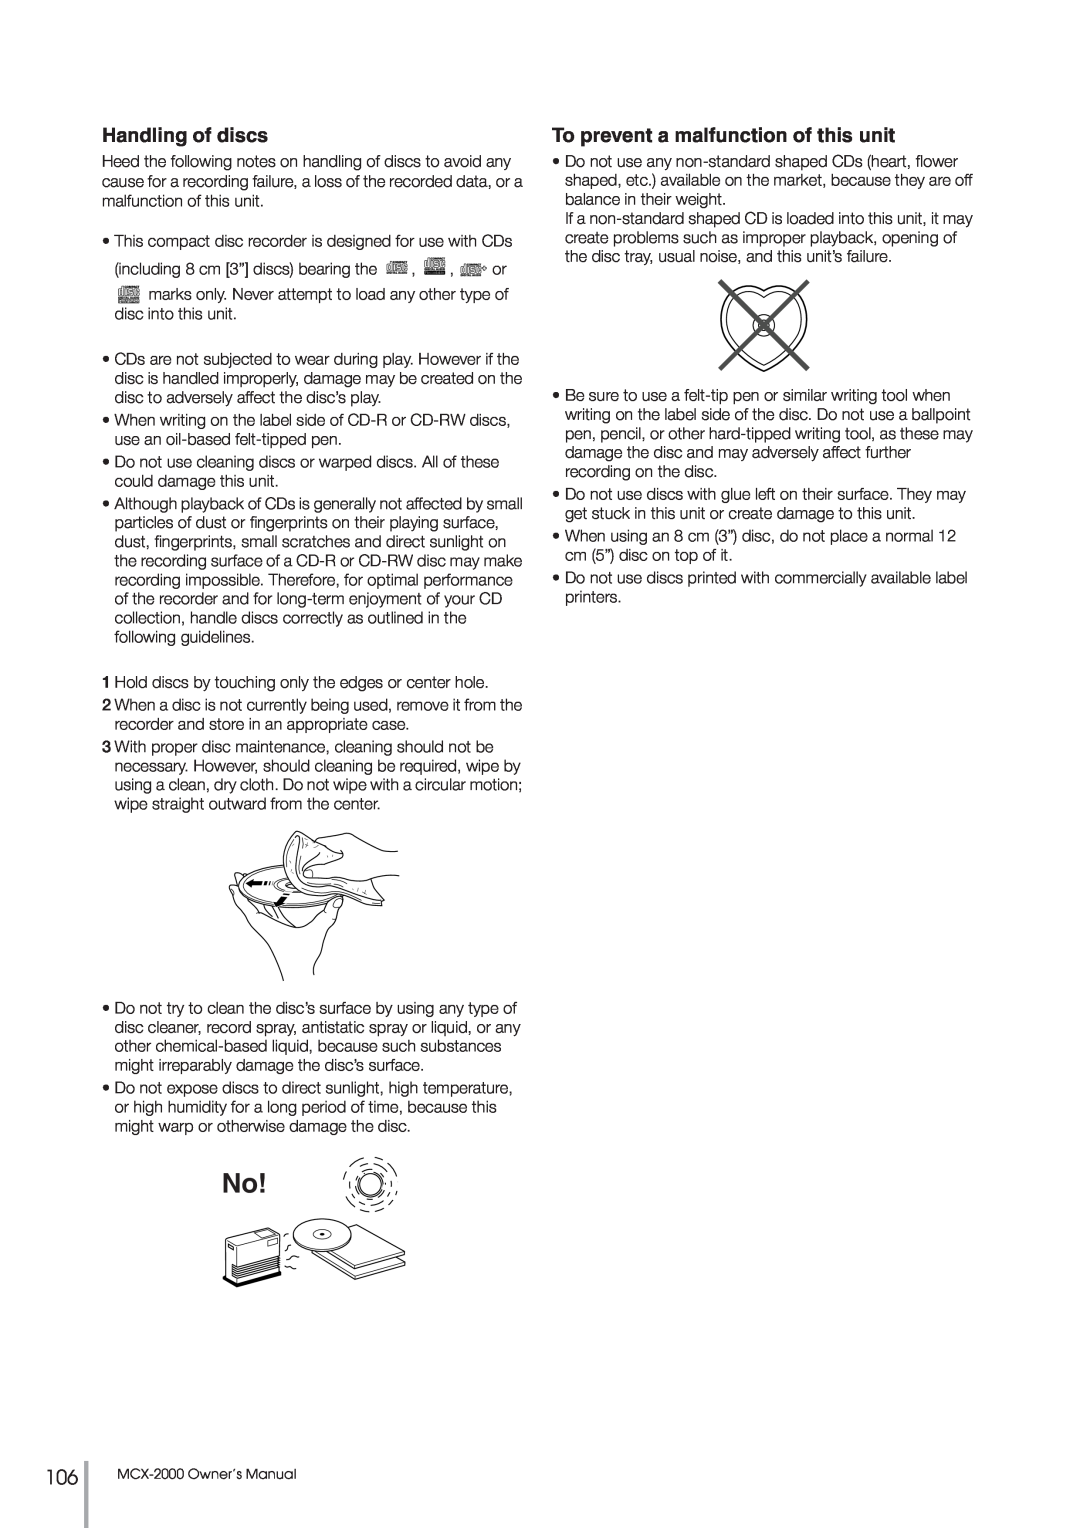 Yamaha MCX-2000 setup guide Handling of discs, To prevent a malfunction of this unit 